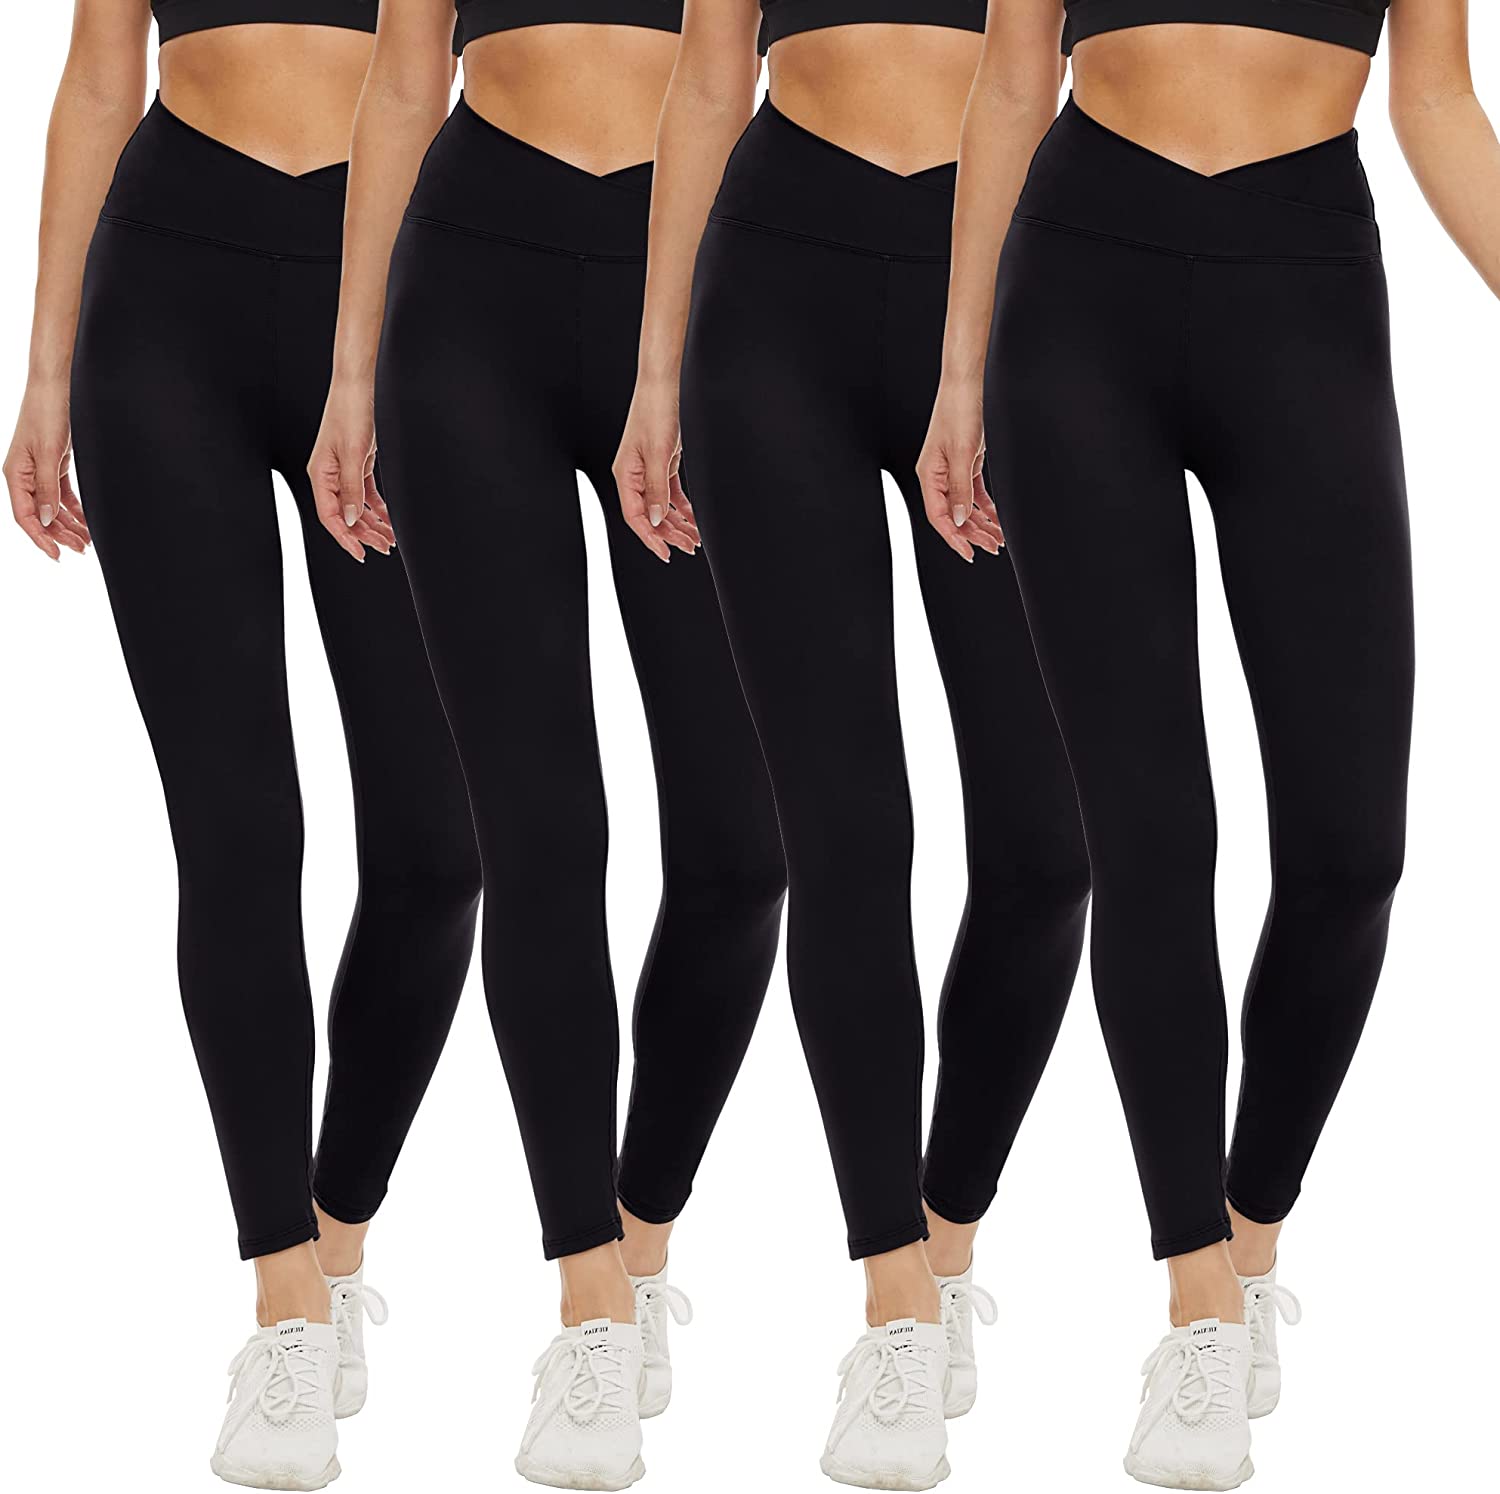 CAMPSNAIL 4 Pack Leggings with Pockets for Women - High Waisted Soft Tummy  Control Slimming Black Yoga Pants Workout Running